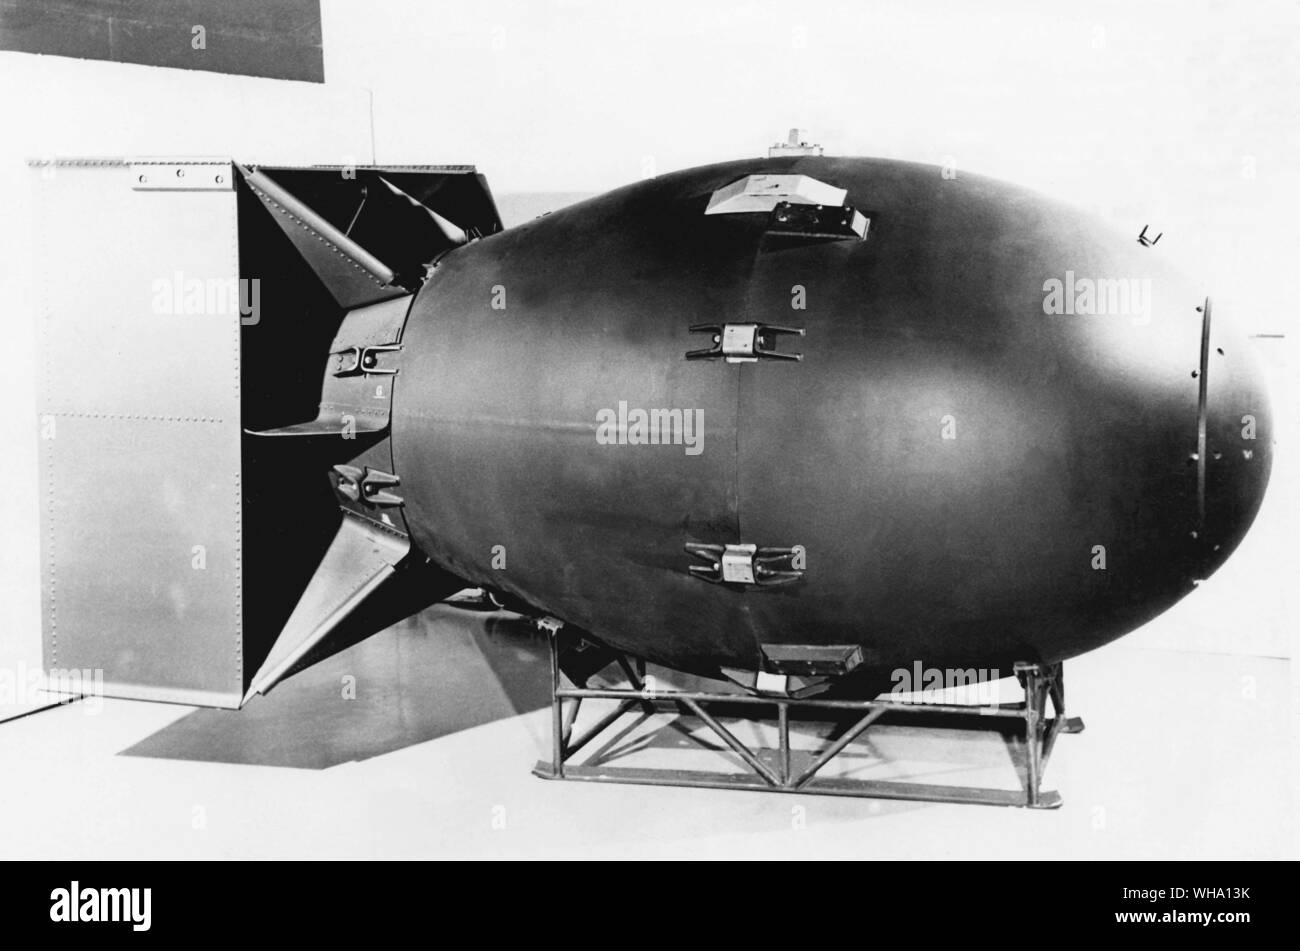 WW2: Nuclear weapon of the Fat Man type, the kind which was detonated over Nagasaki, Japan in 1945. The bomb is 60 inches in diameter and 128 inches long. It weighs 10,000 pounds and had a yield equivalent to c.20,000 tons of high explosive.. Stock Photo